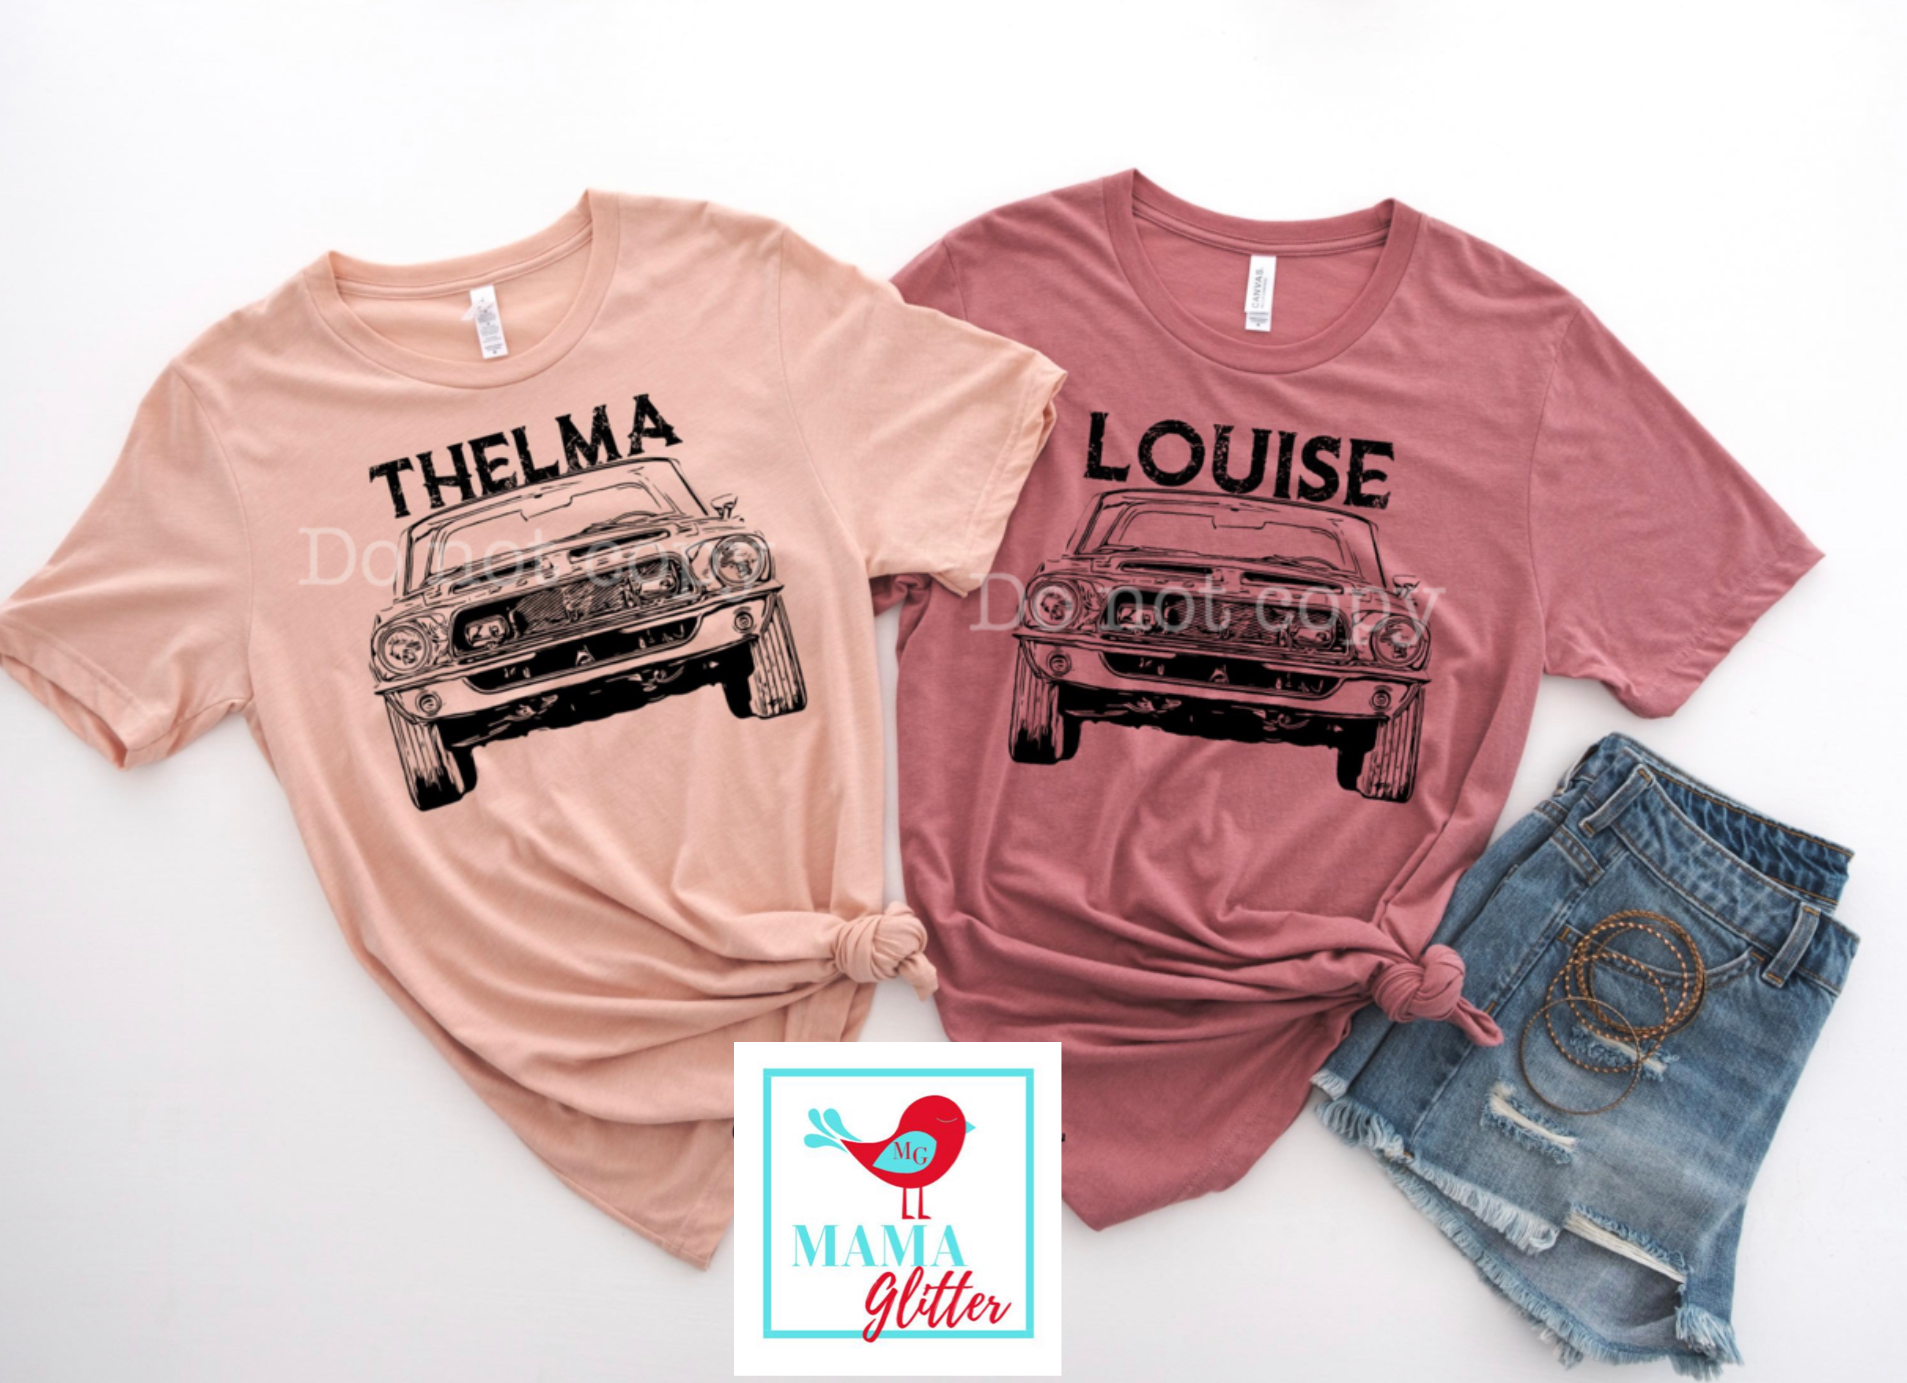 Thelma & Louise Best Friends Shirts - Louise